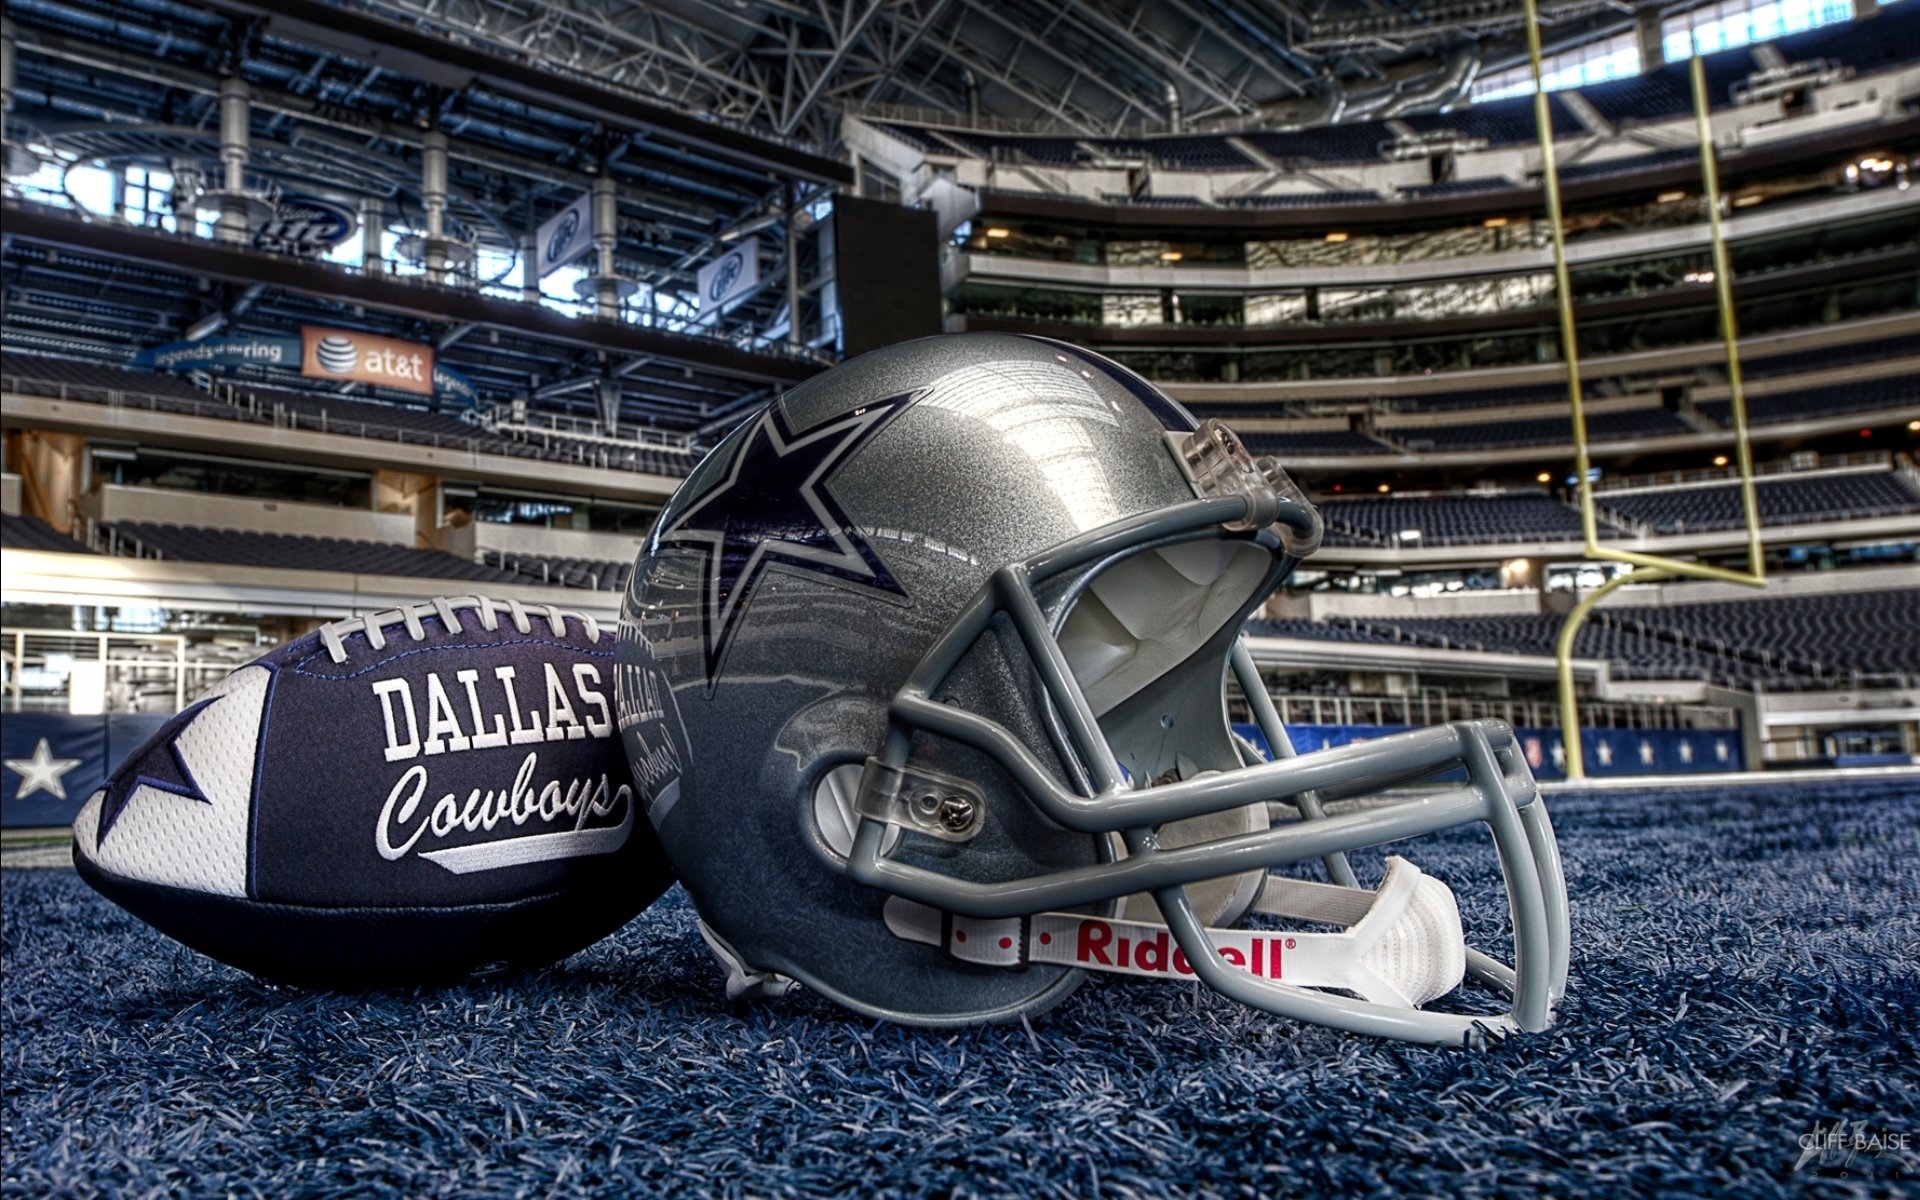 10 Best Dallas Cowboys Hd Wallpaper FULL HD 1080p For PC Background